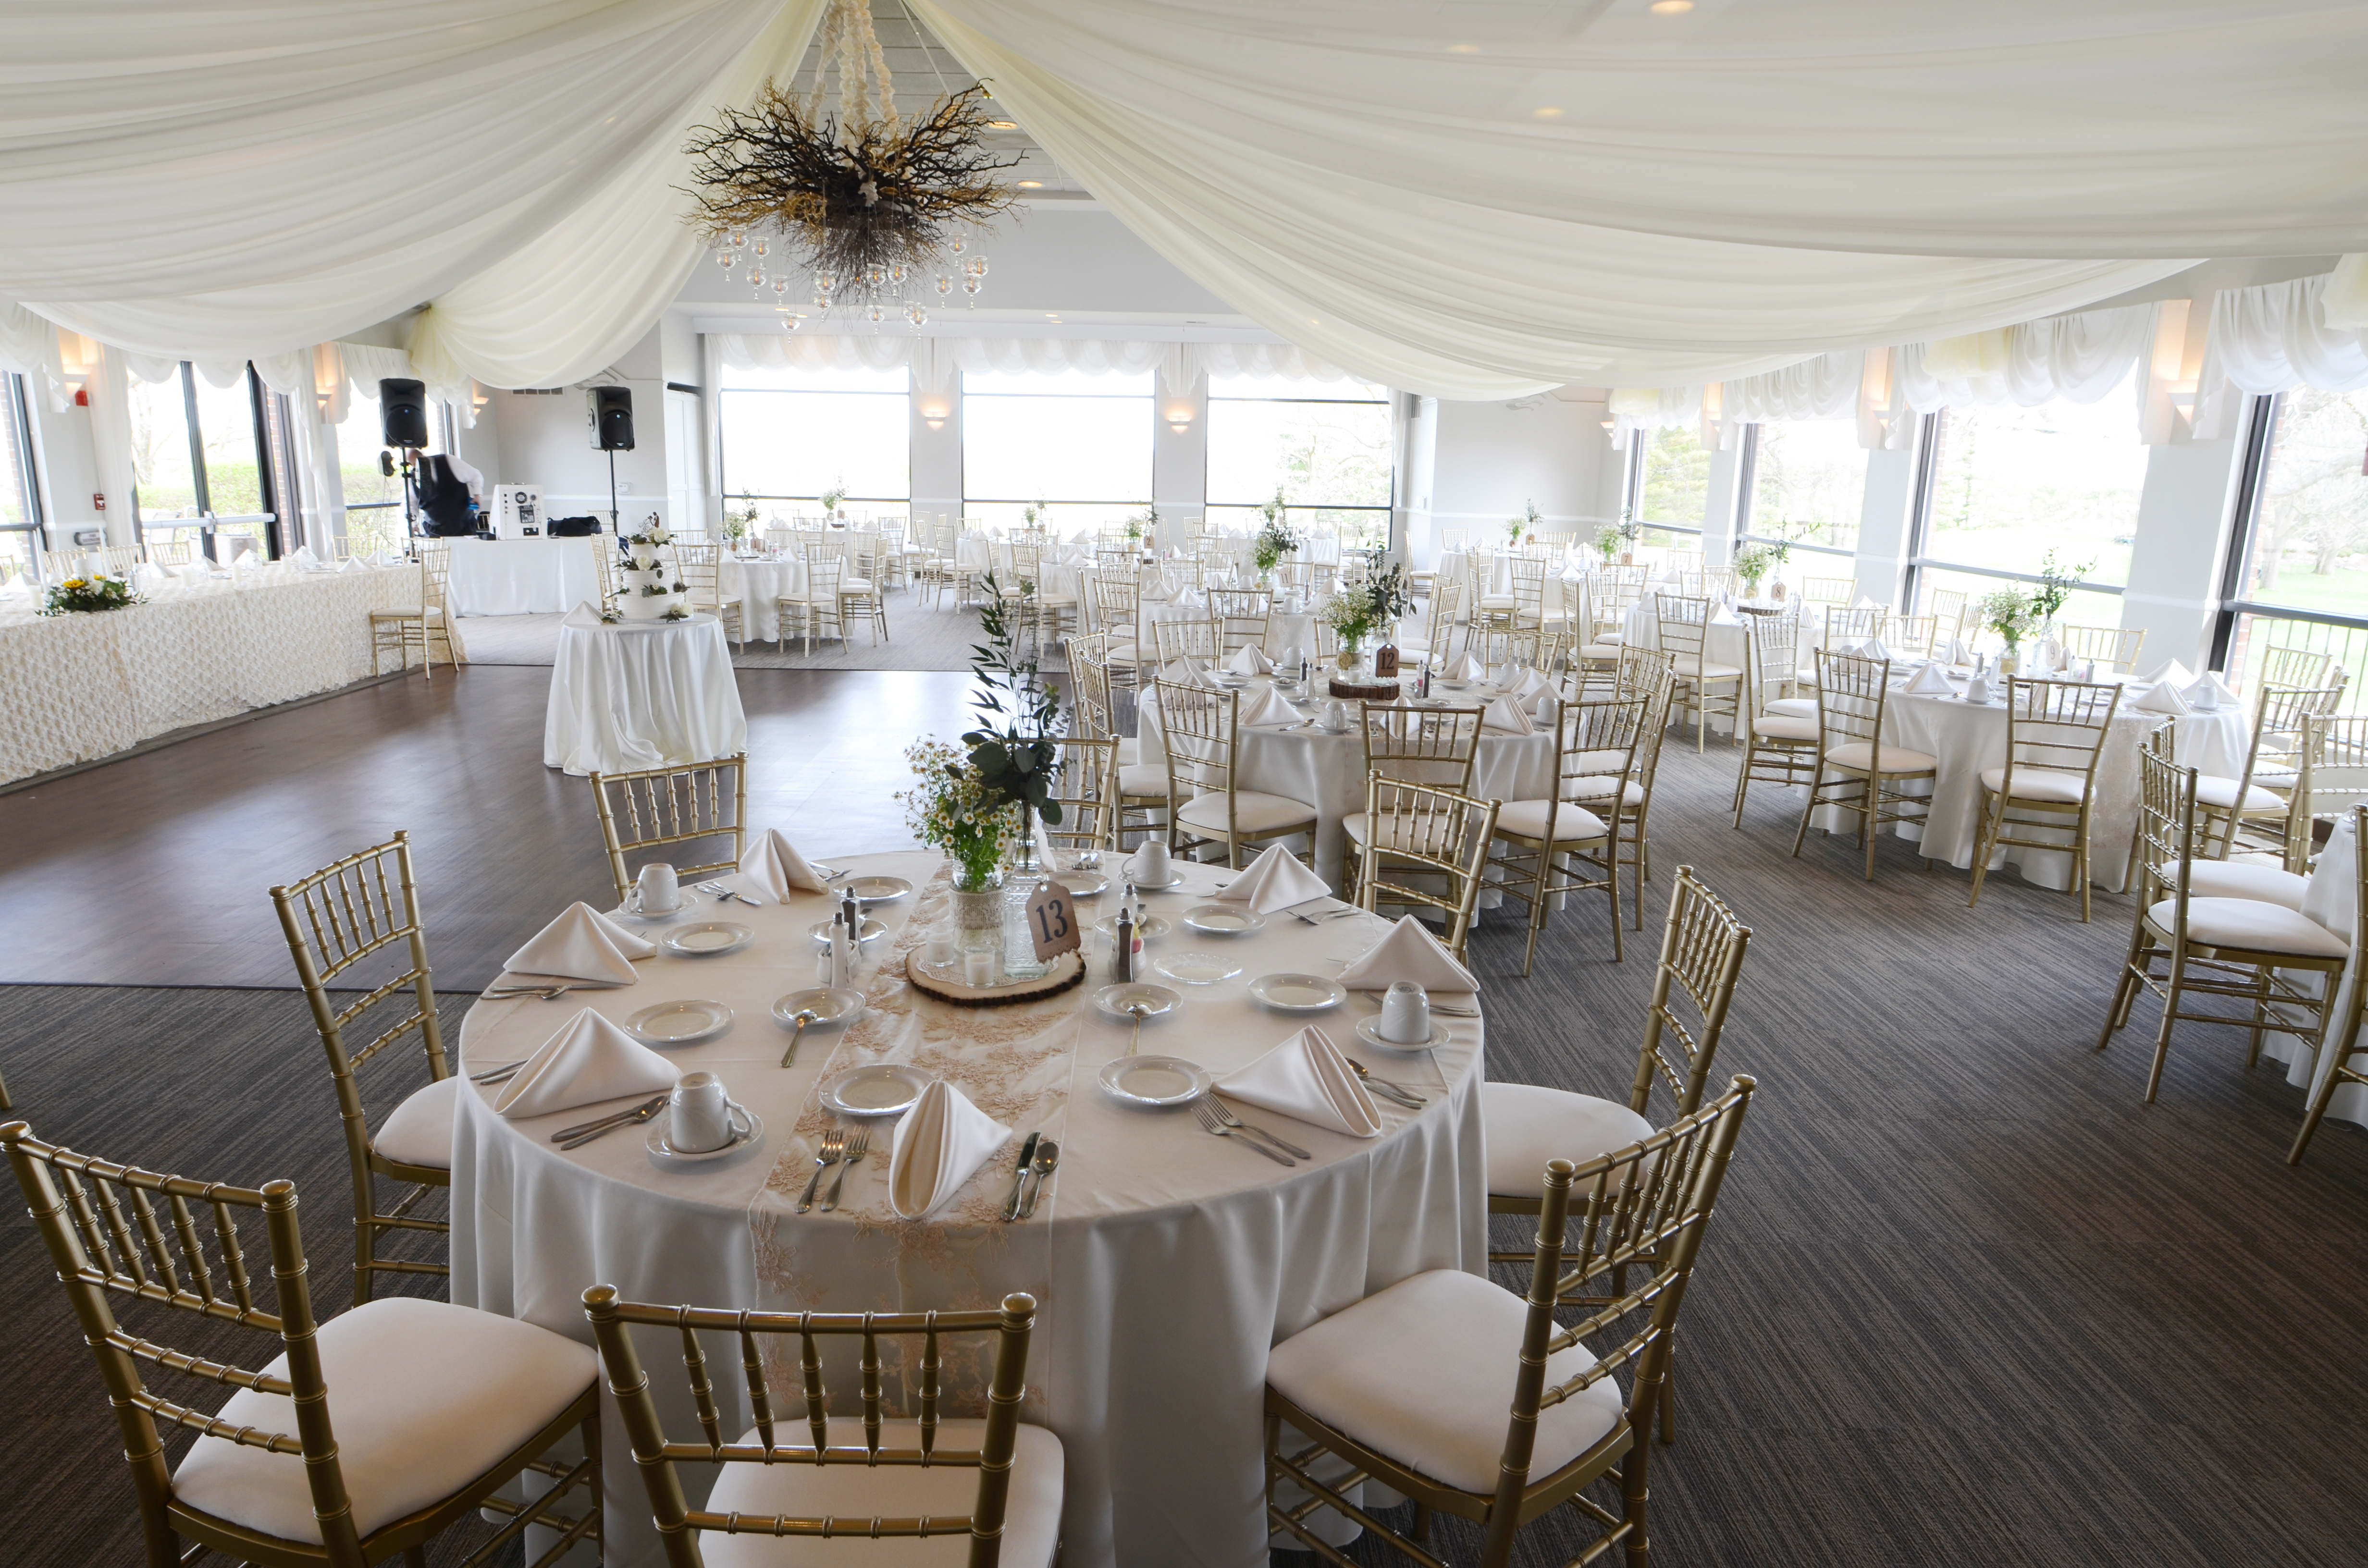 Photo of the Mystic Creek banquet room set up for a wedding.